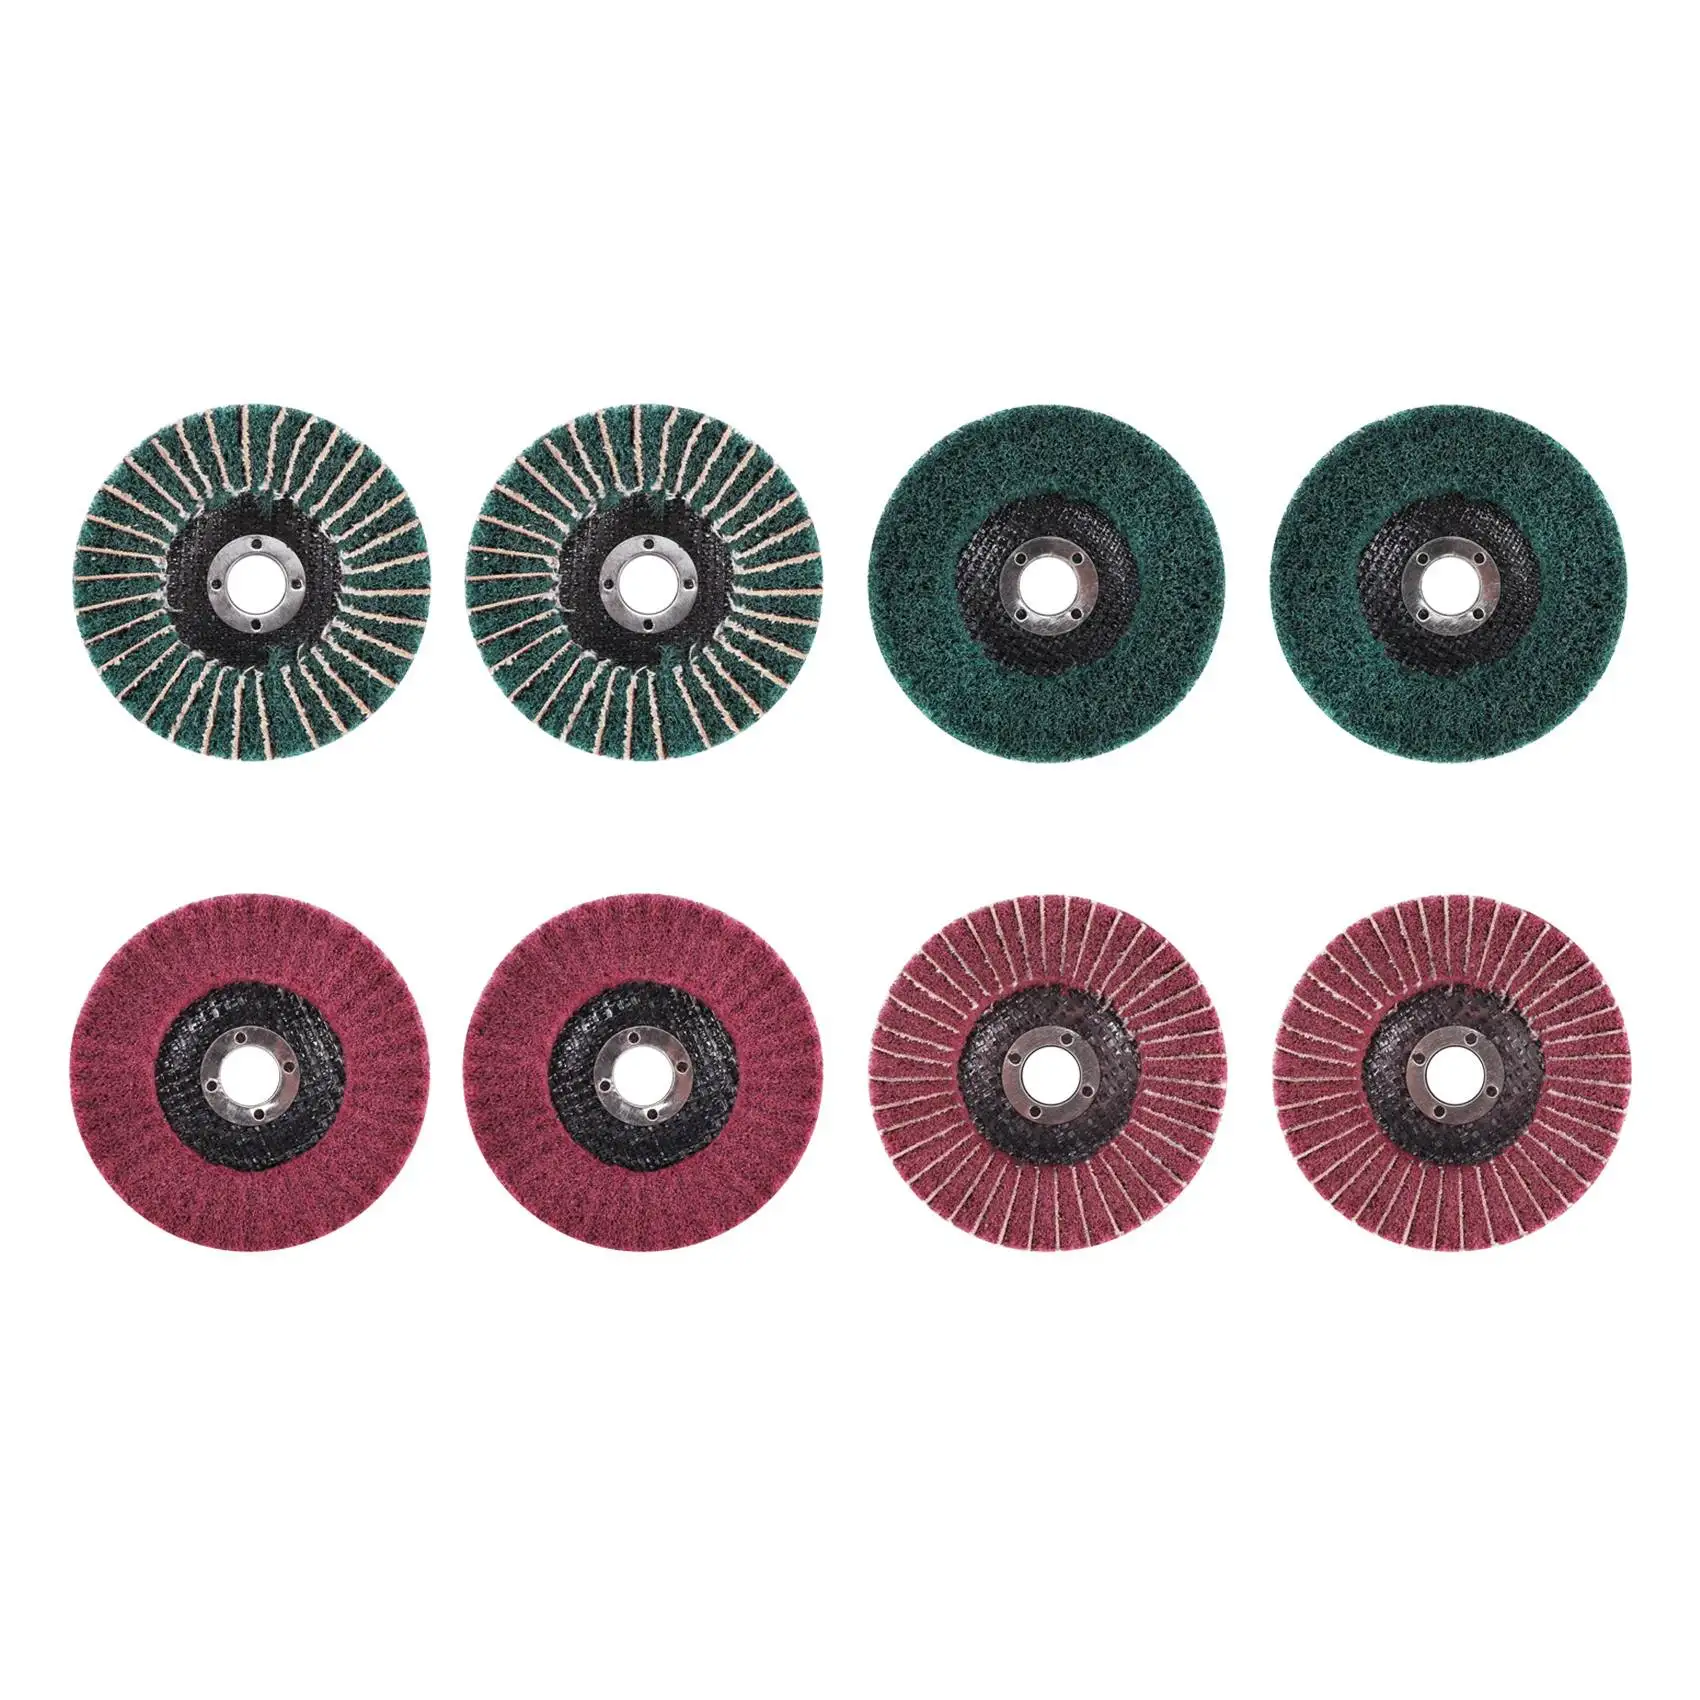 

8PCS 4 Inch Red & Green Nylon Fiber Flap Discs Set Assorted Sanding Grinding Buffing Wheels for Angle Grinder